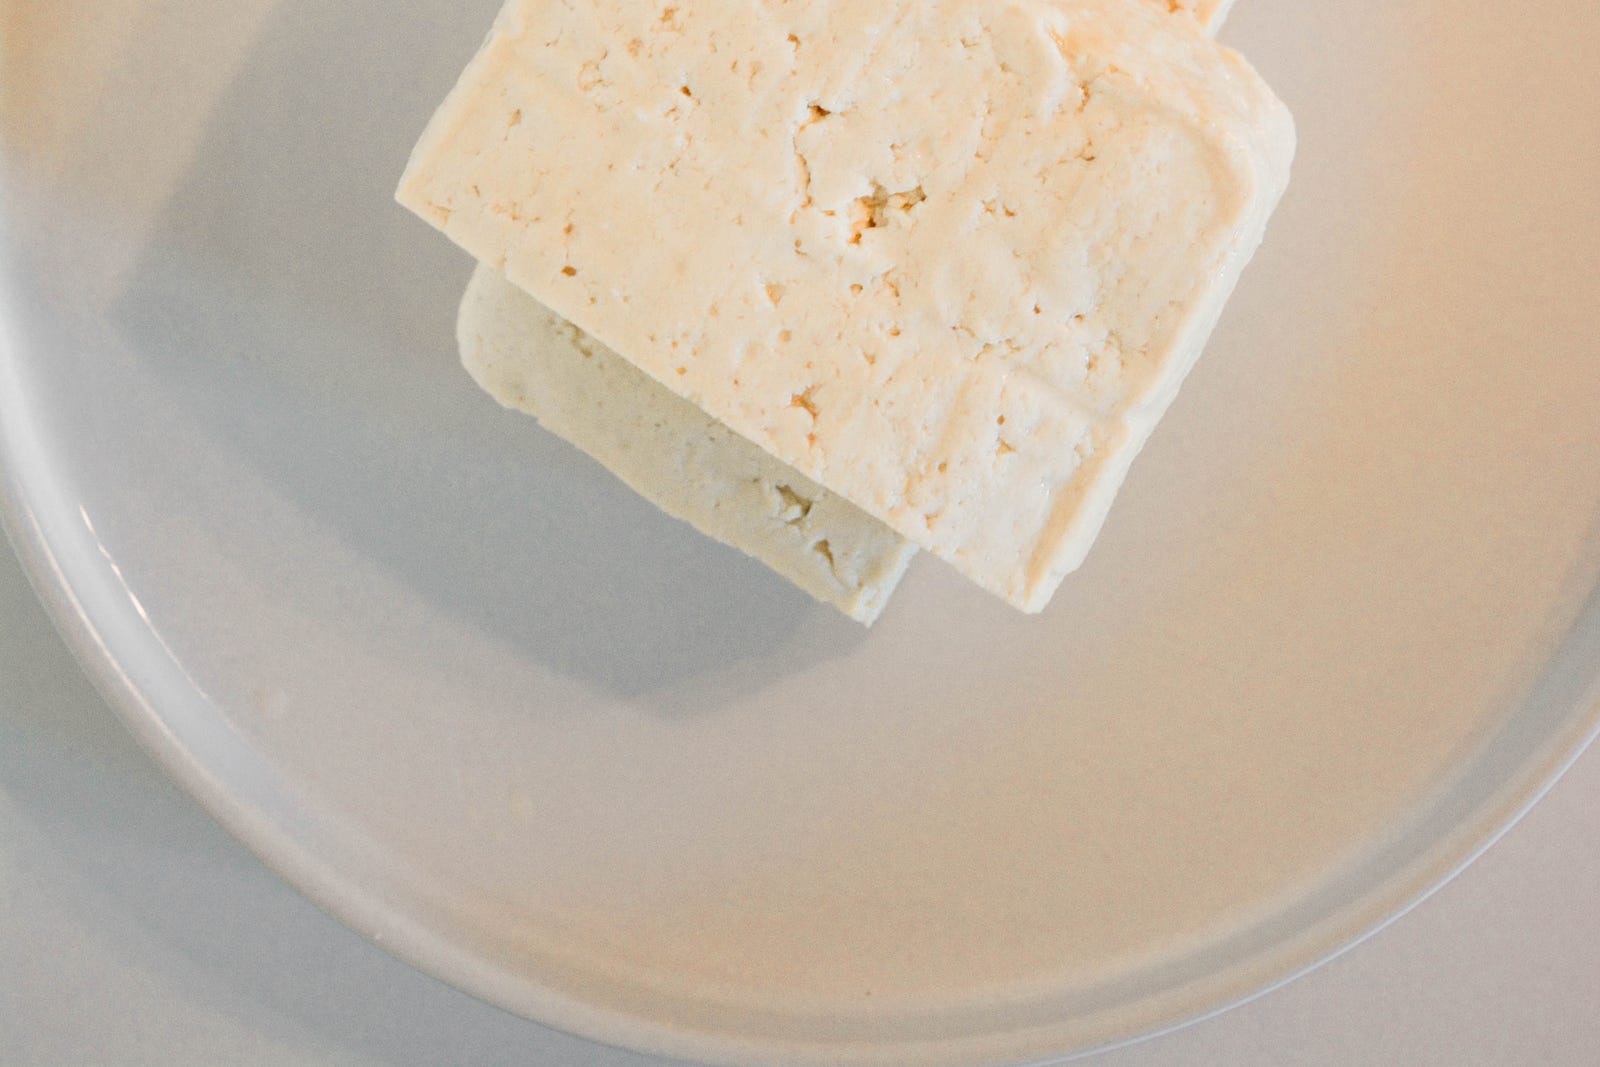 A white plate with two stacked rectangular pieces of tofu.Incorporating soy foods into your diet can promote health.